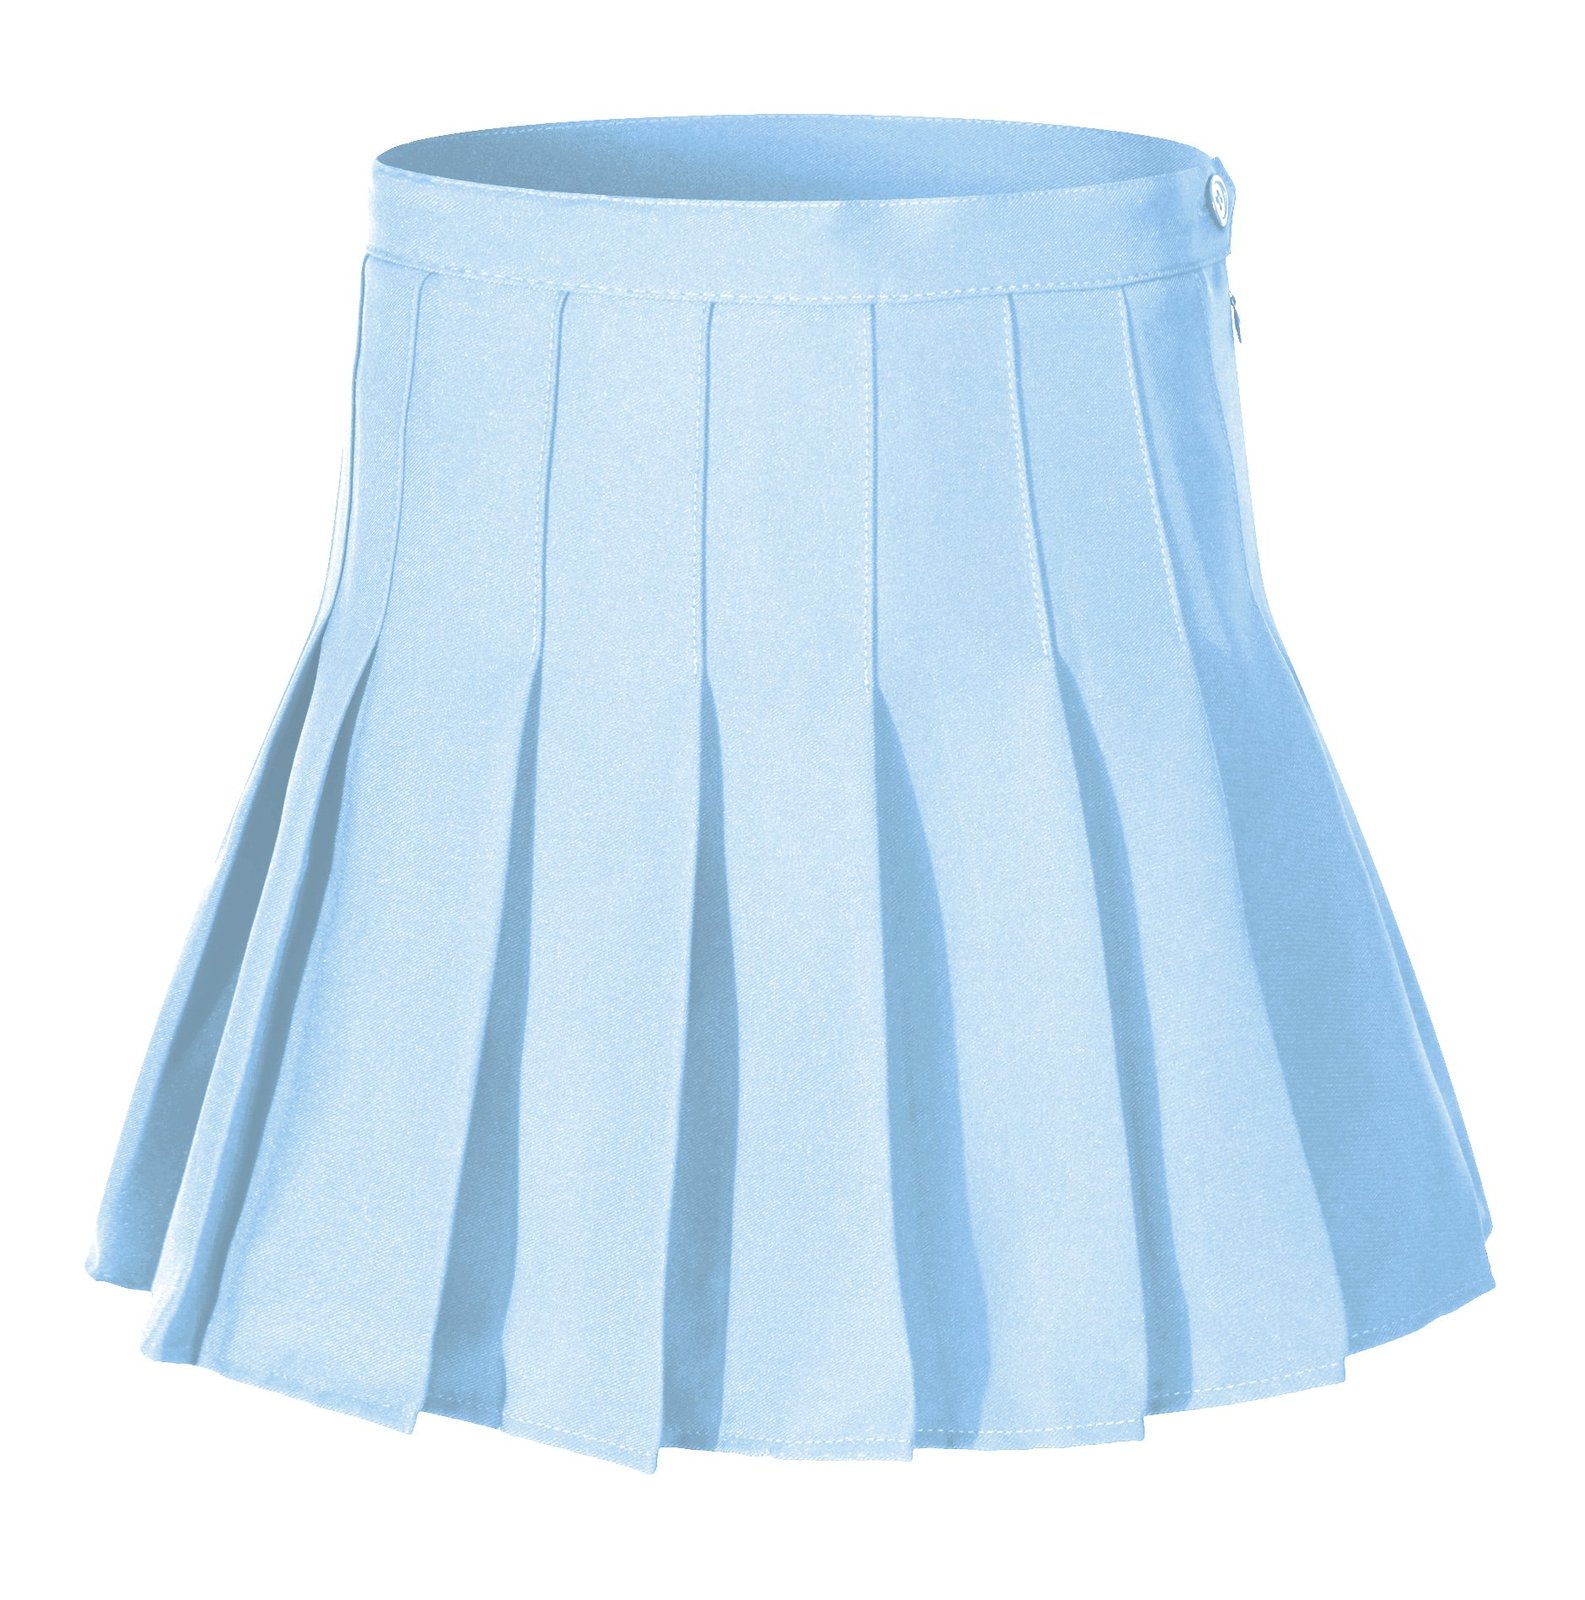 Girl`s Short Pleated School dresses for teen girls tennis Scooters Skirts - $22.76